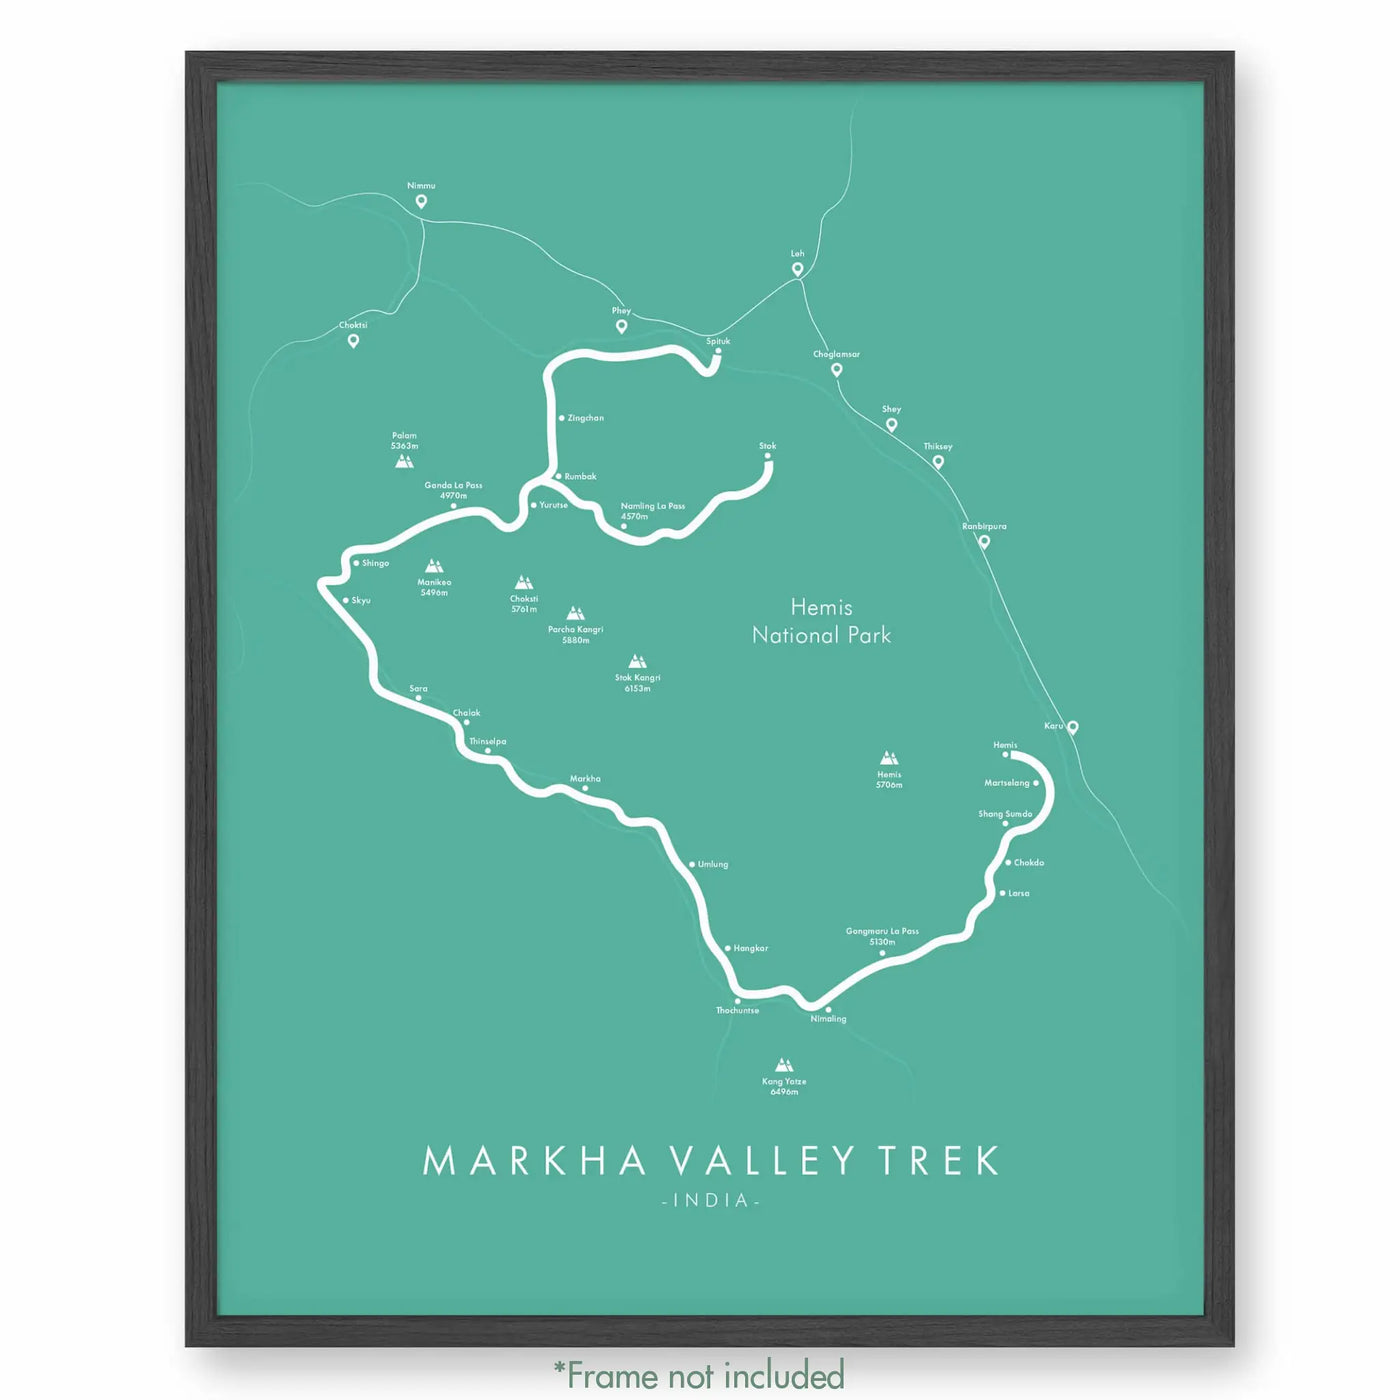 Trail Poster of Markha Valley Trek - Teal